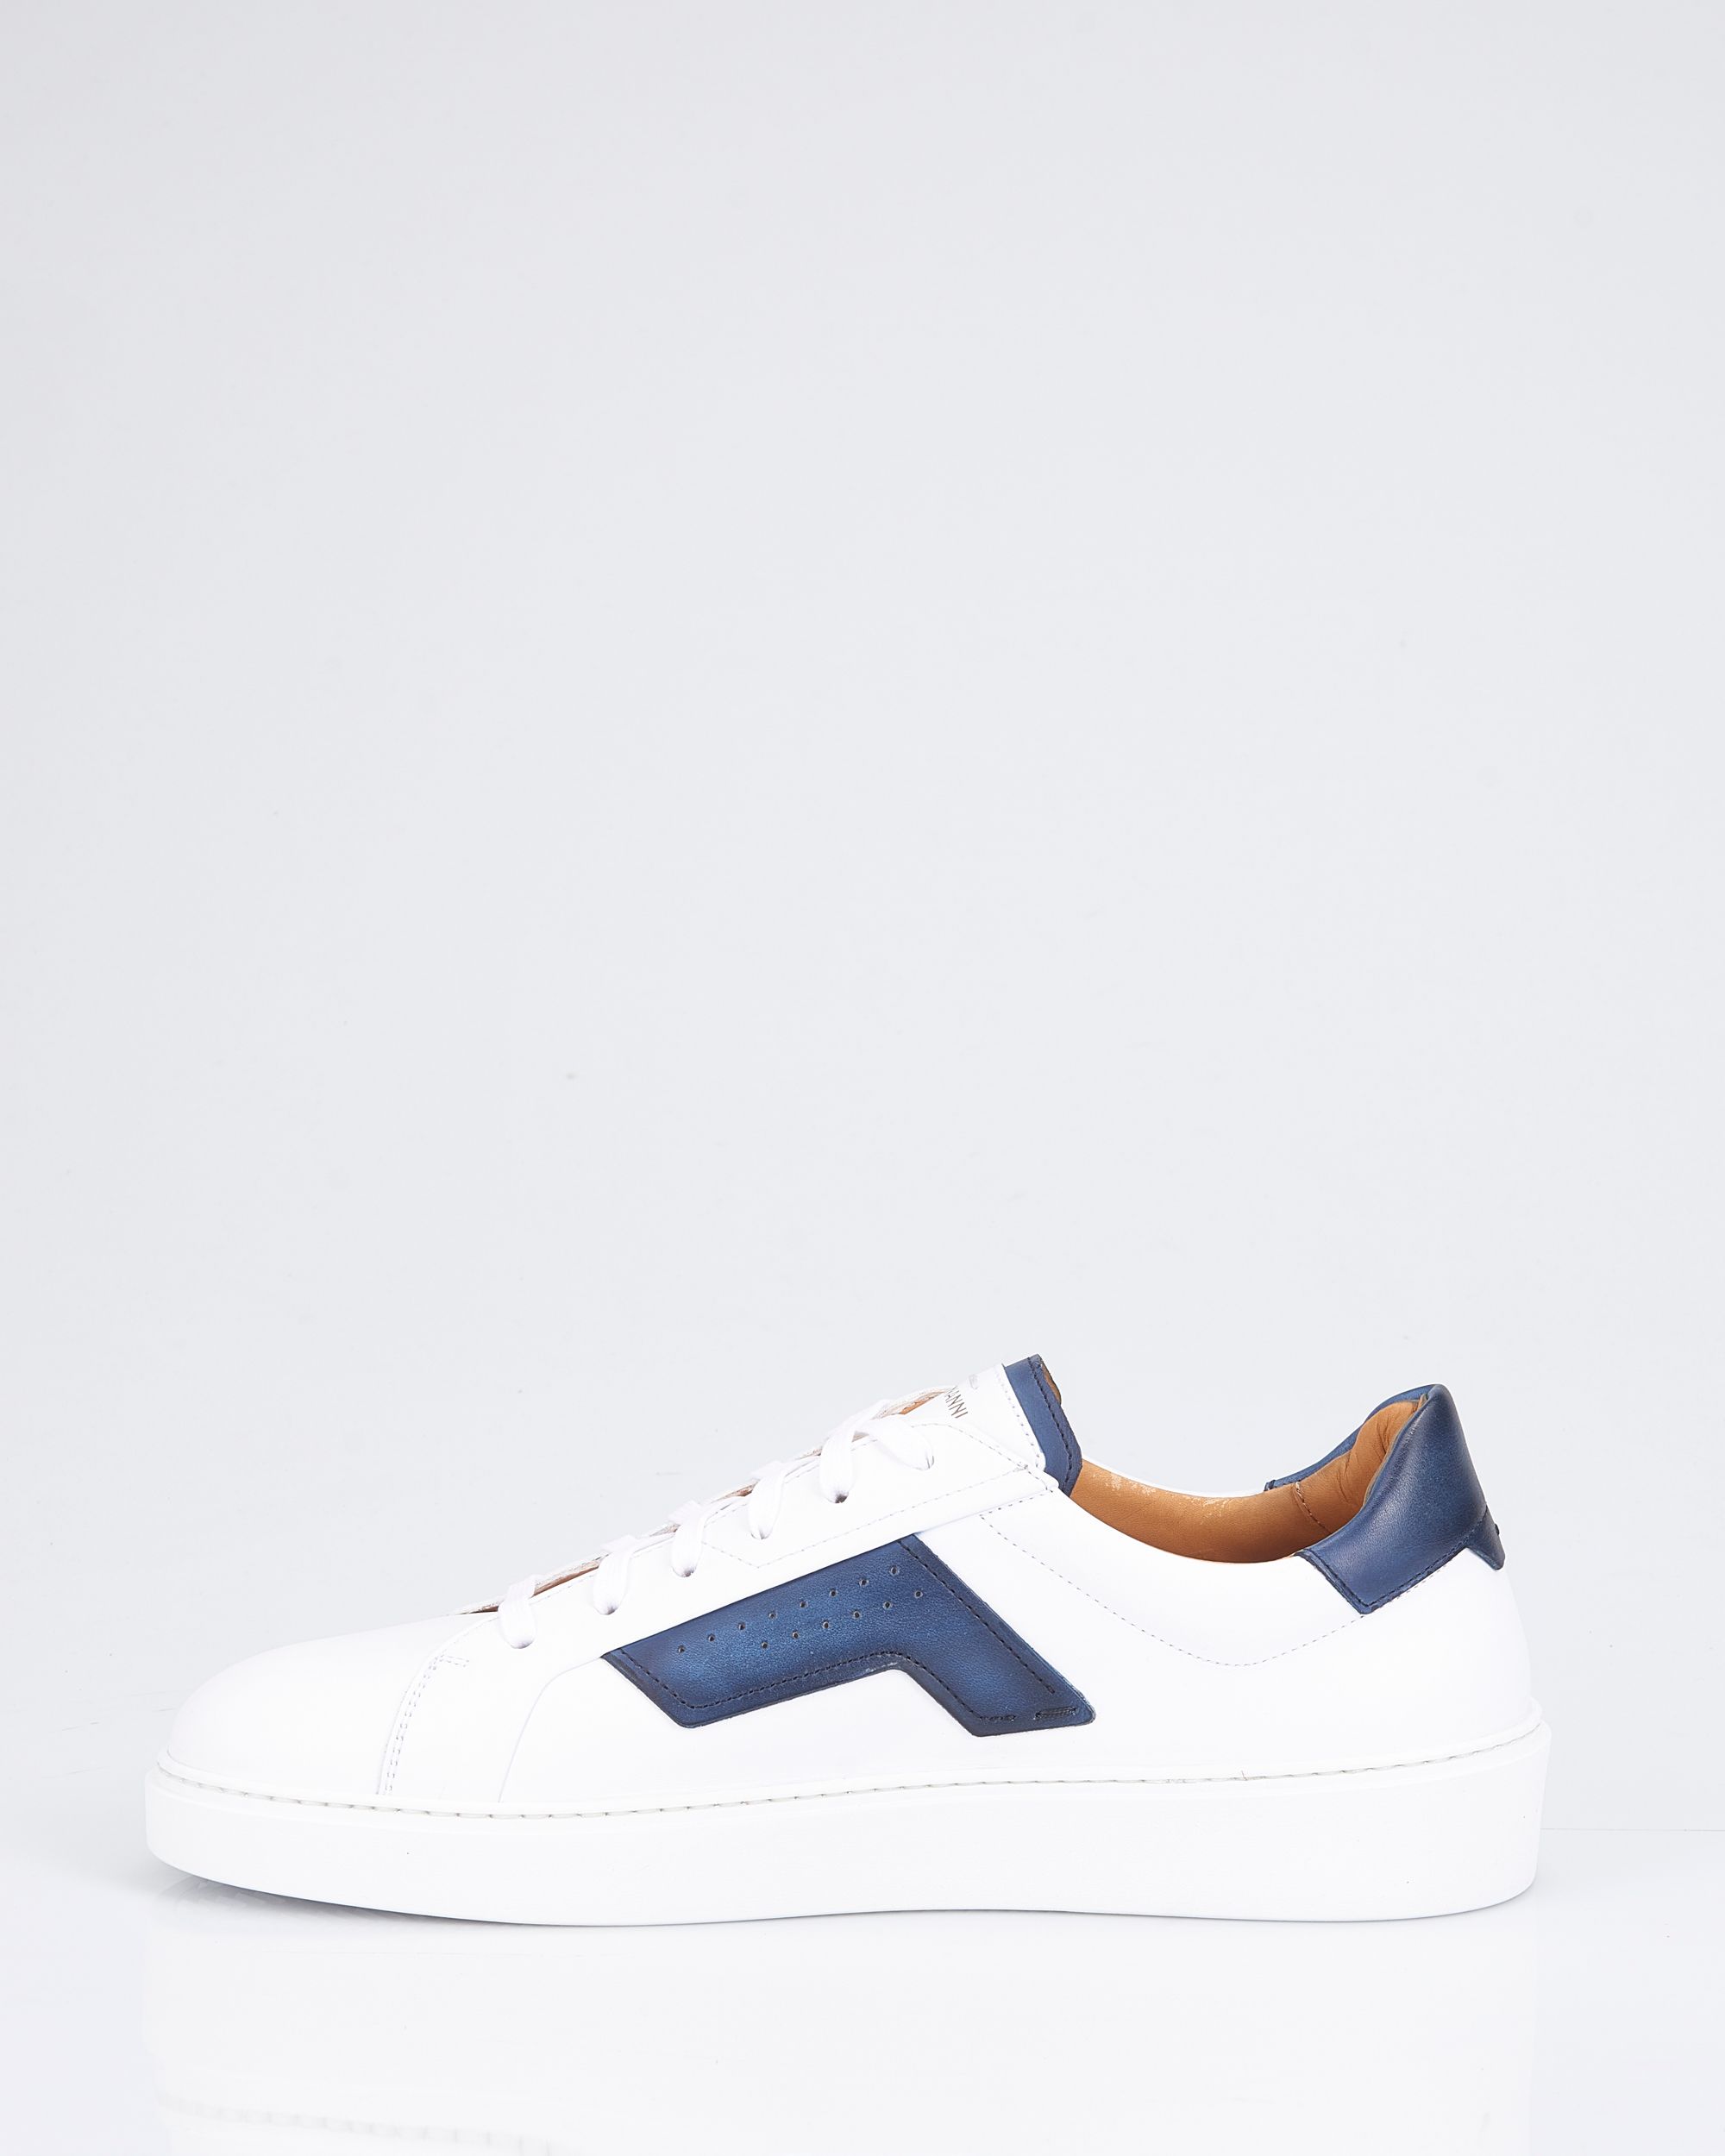 Magnanni Sneakers Donker blauw 086796-001-41